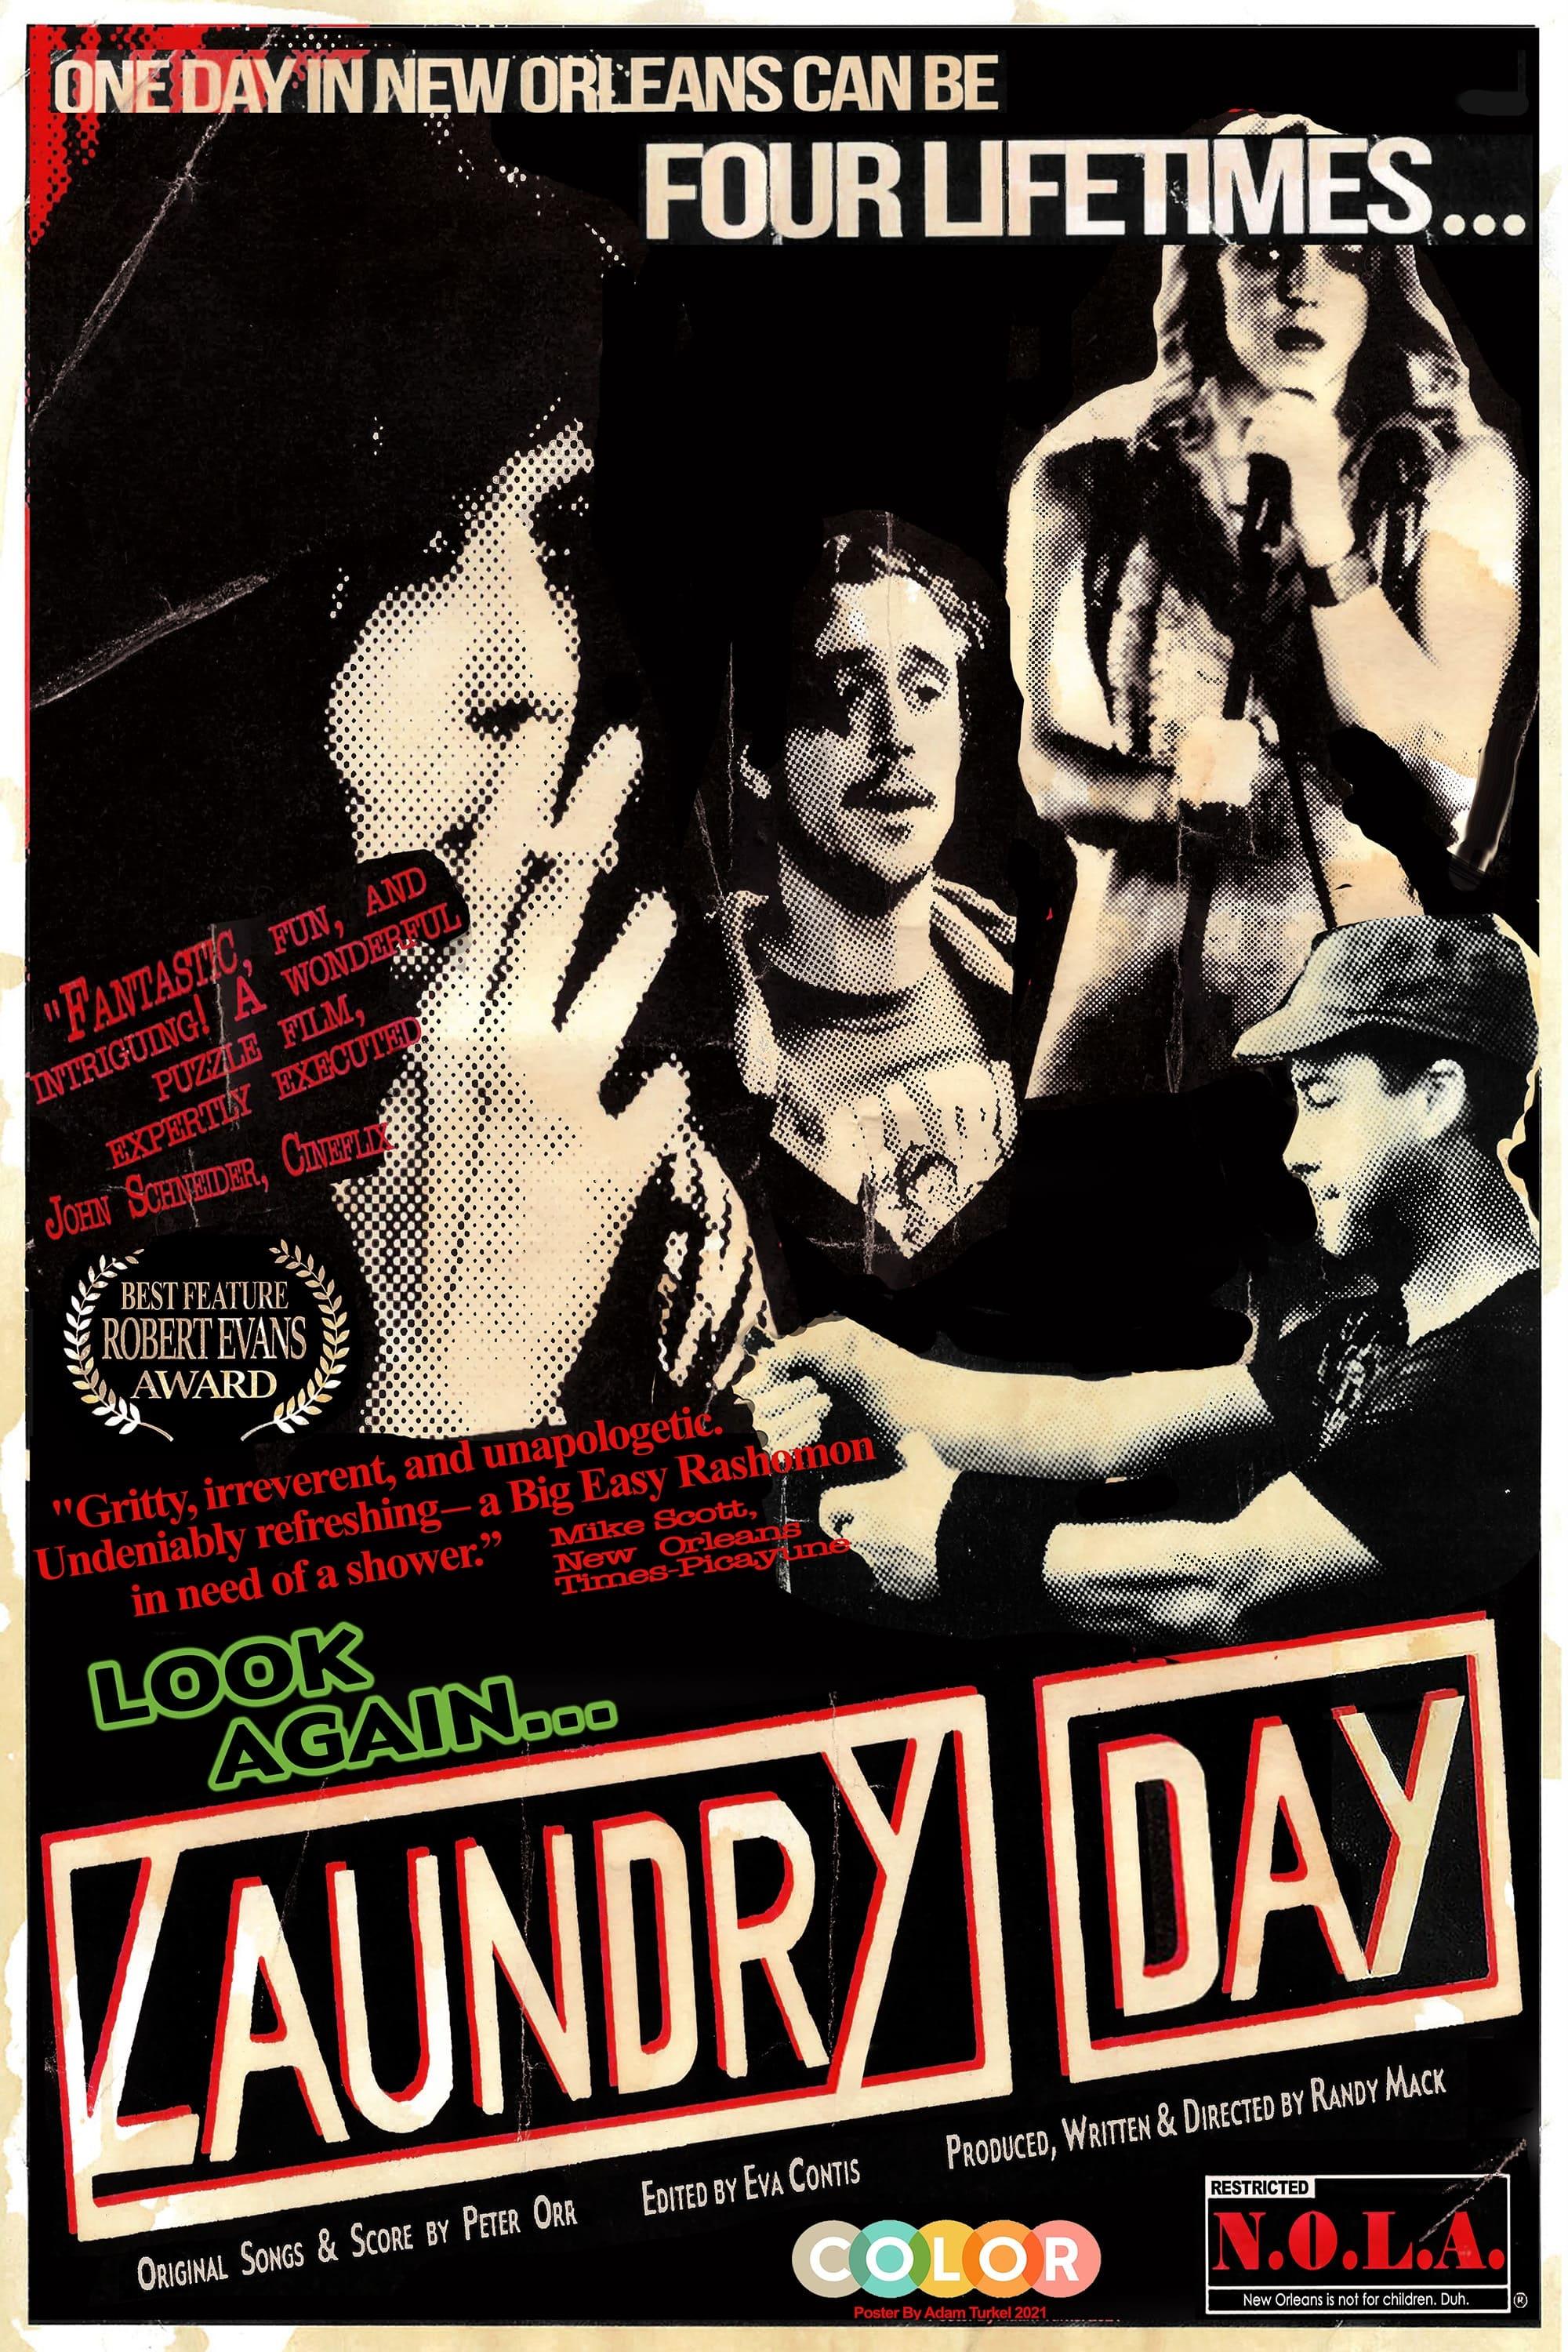 Laundry Day poster